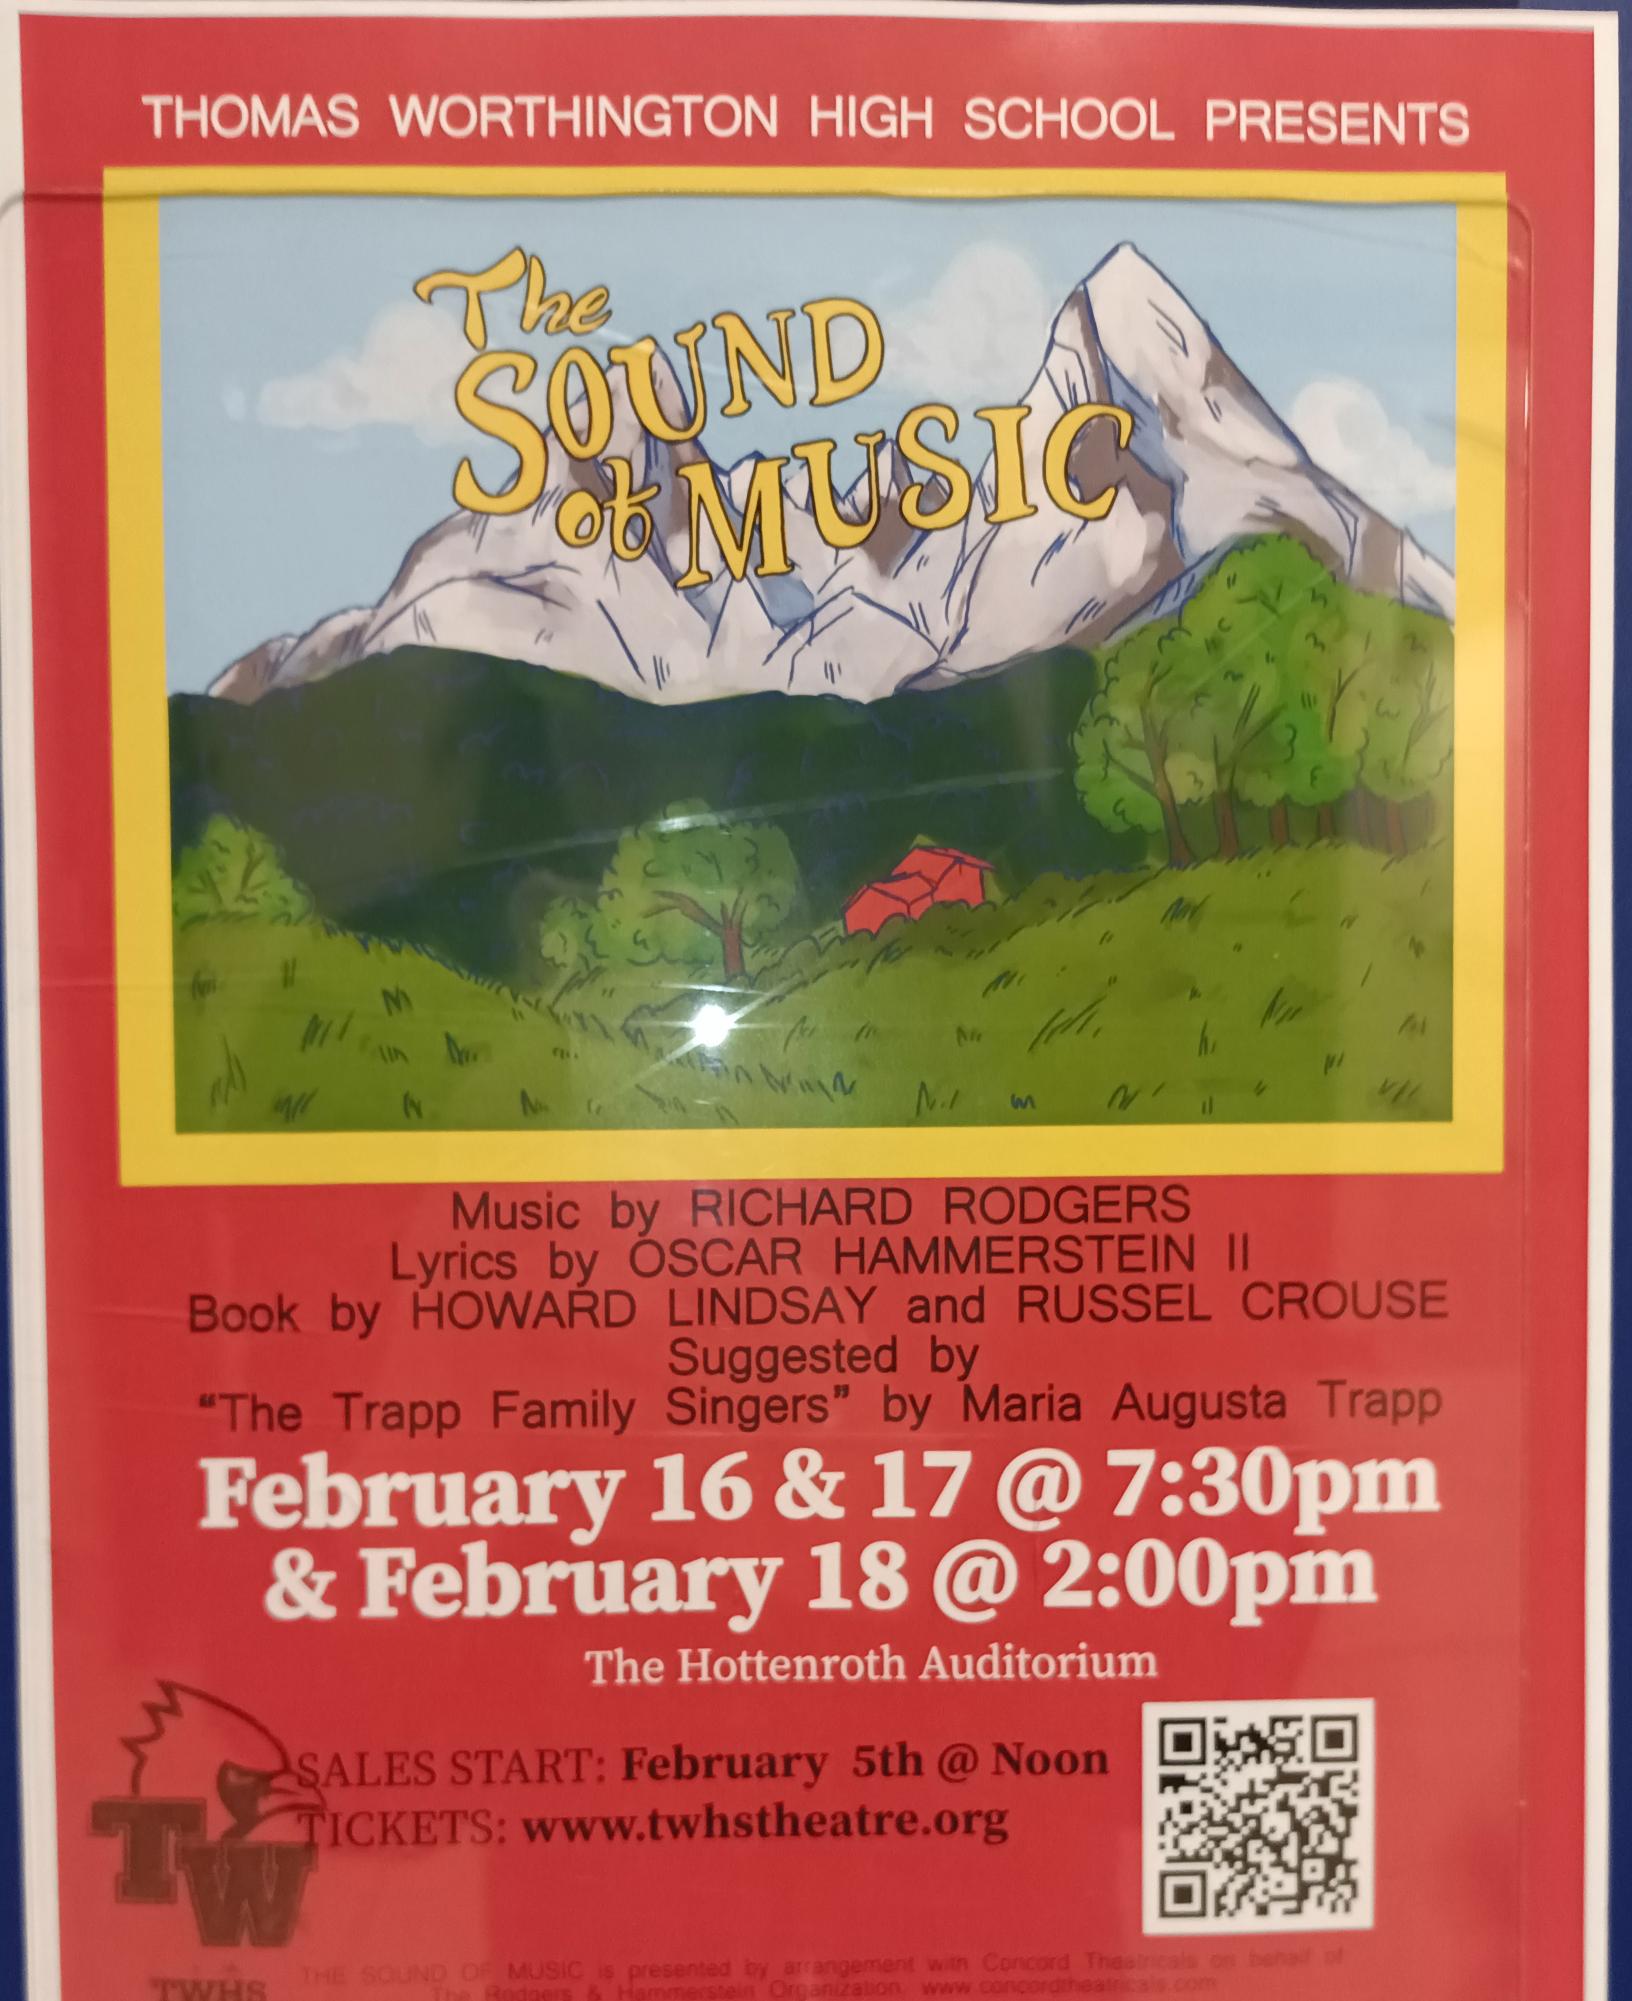 The Sound of Music at TWHS